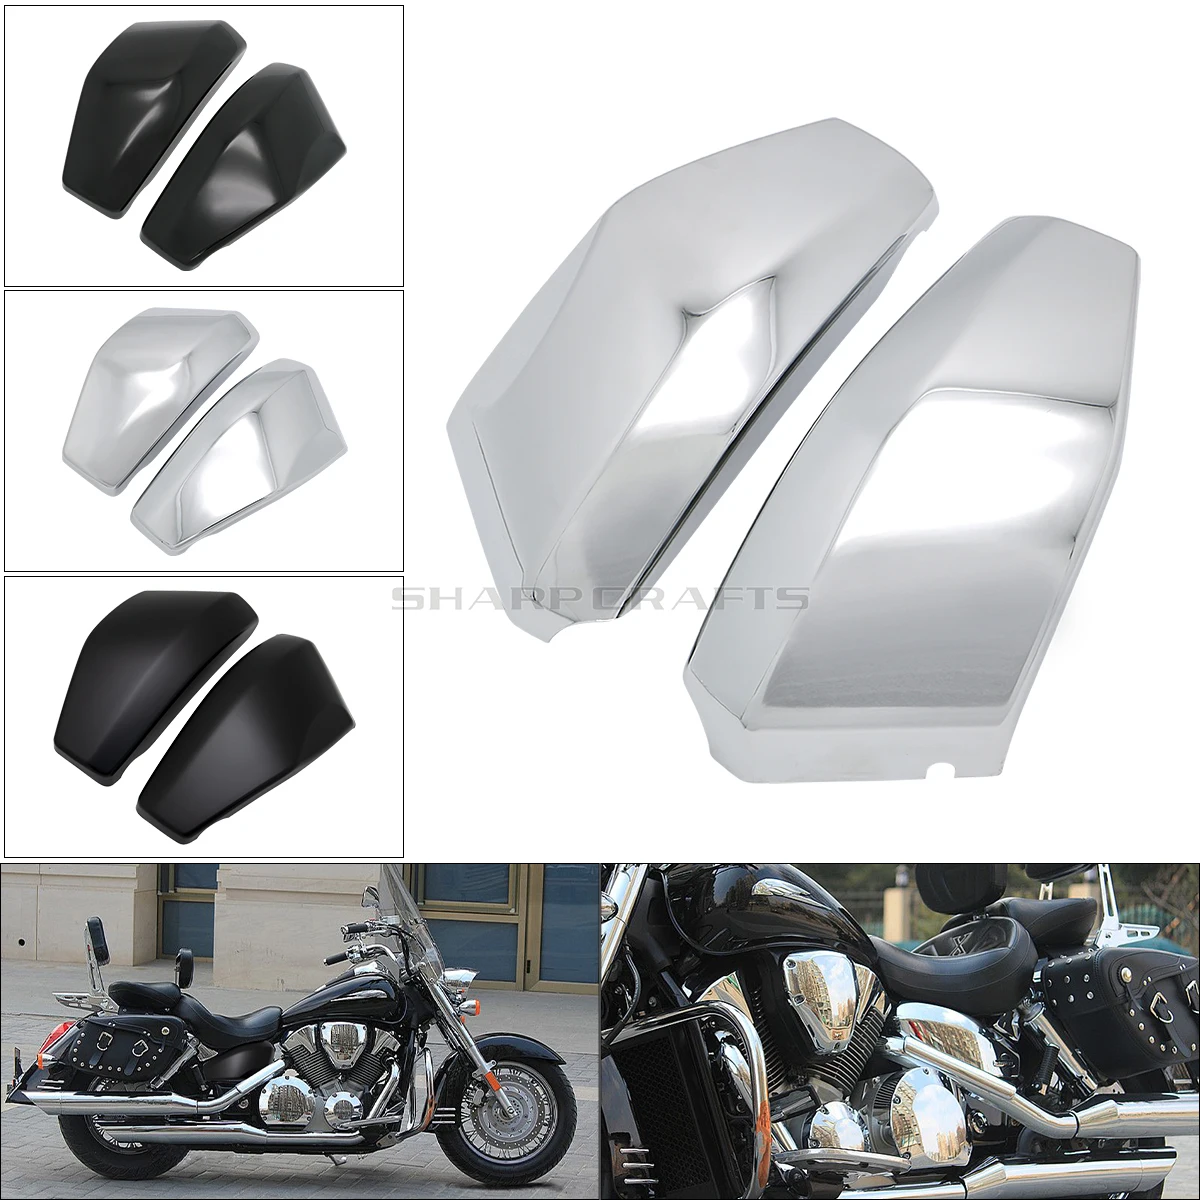 Motorcycle Accessories Battery Fairing Side Covers For Honda VTX1300 R/S... - $55.85